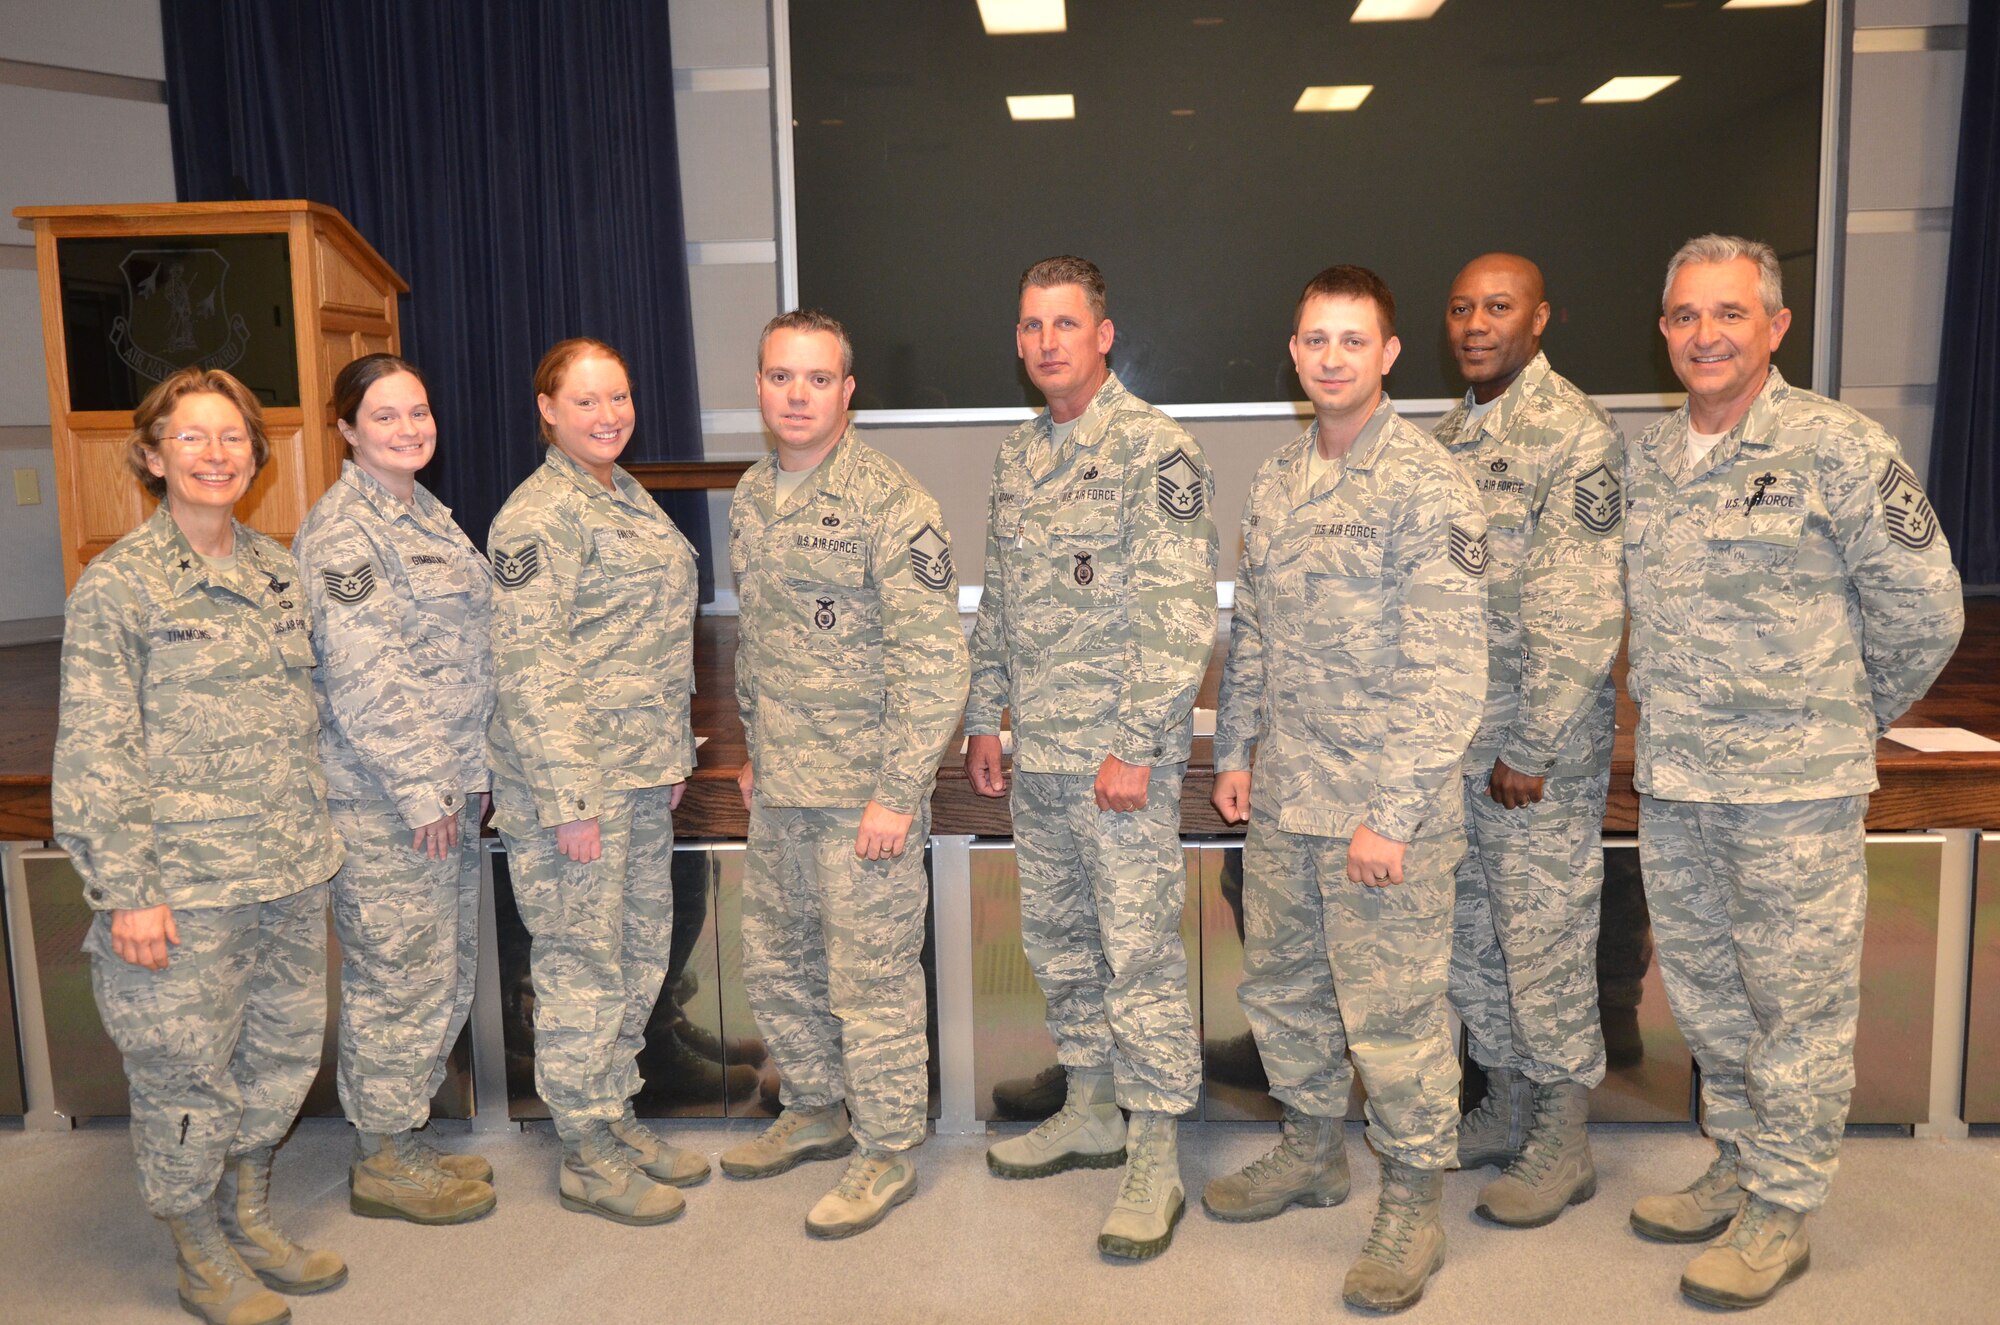 Six of the nine April 2013 graduates of the Community College of the Air Force from the Delaware Air National Guard pose for a photo with senior leaders at Delaware ANG Headquarters, New Castle ANG Base, Del., on May 5, 2013. Left to right (name, unit, current residence city and state and CCAF degree earned): Brig. Gen. Carol Timmons, assistant adjutant general for air, Delaware National Guard; Tech. Sgt. Jacquelyn M. Gimbutas, 166th Comptroller Flight, a resident of Newark, Del. (Financial Management); Tech. Sgt. Kristen L. Favors, Delaware ANG Recruiting Office, a resident of Smyrna, Del. (Human Resource Management); Master Sgt. Timothy M. Luko, 166th Security Forces Squadron, a resident of Wenonah, N.J. (Criminal Justice); Senior Master Sgt. ; Jeffrey L. Adams, 166th Security Forces Squadron, resident of Newark, Del. (Criminal Justice); Tech. Sgt. Michael A. Heinz, 166th Logistics Readiness Squadron, a resident of Dover, Del. (Transportation); Master Sgt. Thomas F. Dennis, 166th Logistics Readiness Squadron, resident of Millsboro, Del. (Mechanical & Electrical Technology); 166th Airlift Wing Command Chief Master Sgt. Henry Rome. A total of 382 associate of applied science degrees have been awarded to Delaware Air National Guard members since 1976, the first year the CCAF awarded degrees. Not in photo: Tech. Sgt. Brian D. Bennett, 166th Communications Flight, resident of Annapolis, Md. (Electronic Systems); Staff Sgt. Erin E. May, 166th Security Forces Squadron, a resident of North East, Md. (Criminal Justice); Staff Sgt. Travis J. Von Bodungen, 142nd Airlift Squadron, a resident of Lafayette, La. (Logistics). (U.S. Air National Guard photo by Tech. Sgt. Benjamin Matwey)